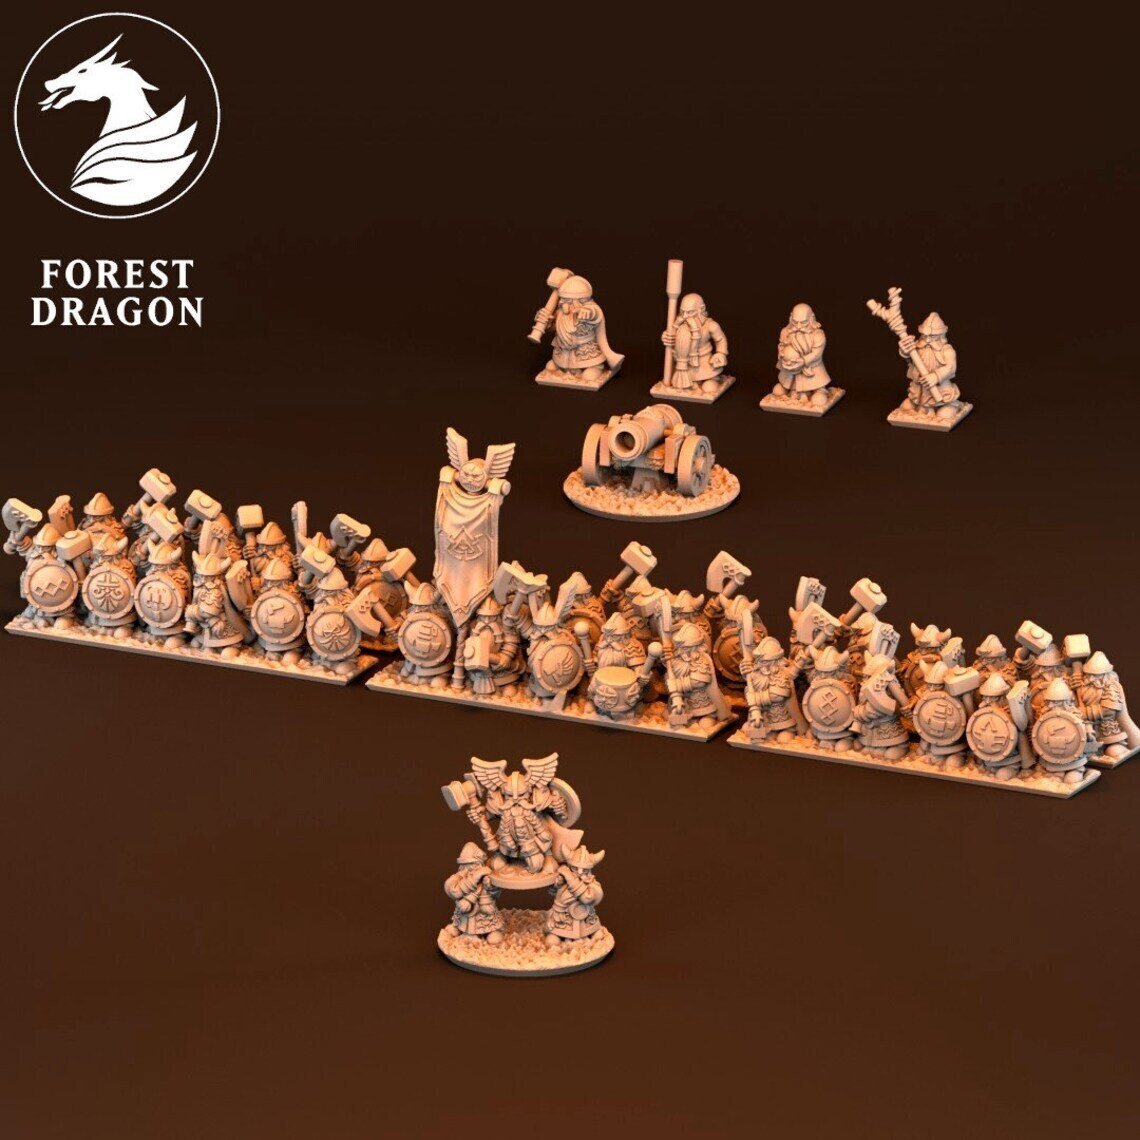 Dwarves Starter Army for Warmaster designed by Forest Dragon 3D Printed by Forgemaster Miniatures